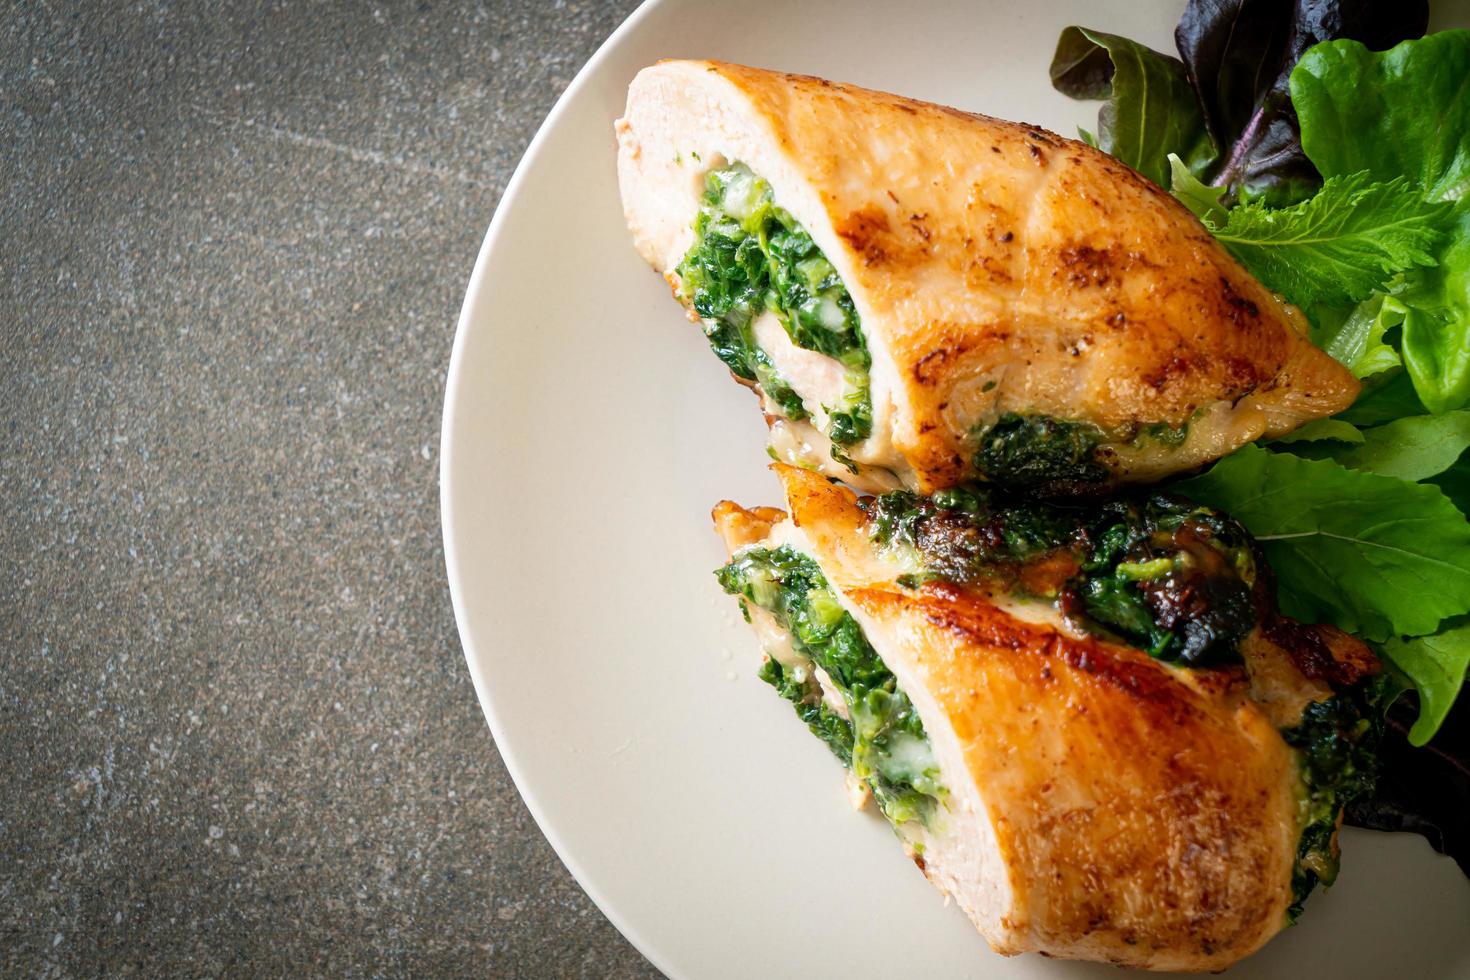 Chicken breast stuffed with cheese and spinach 2882986 Stock Photo at ...